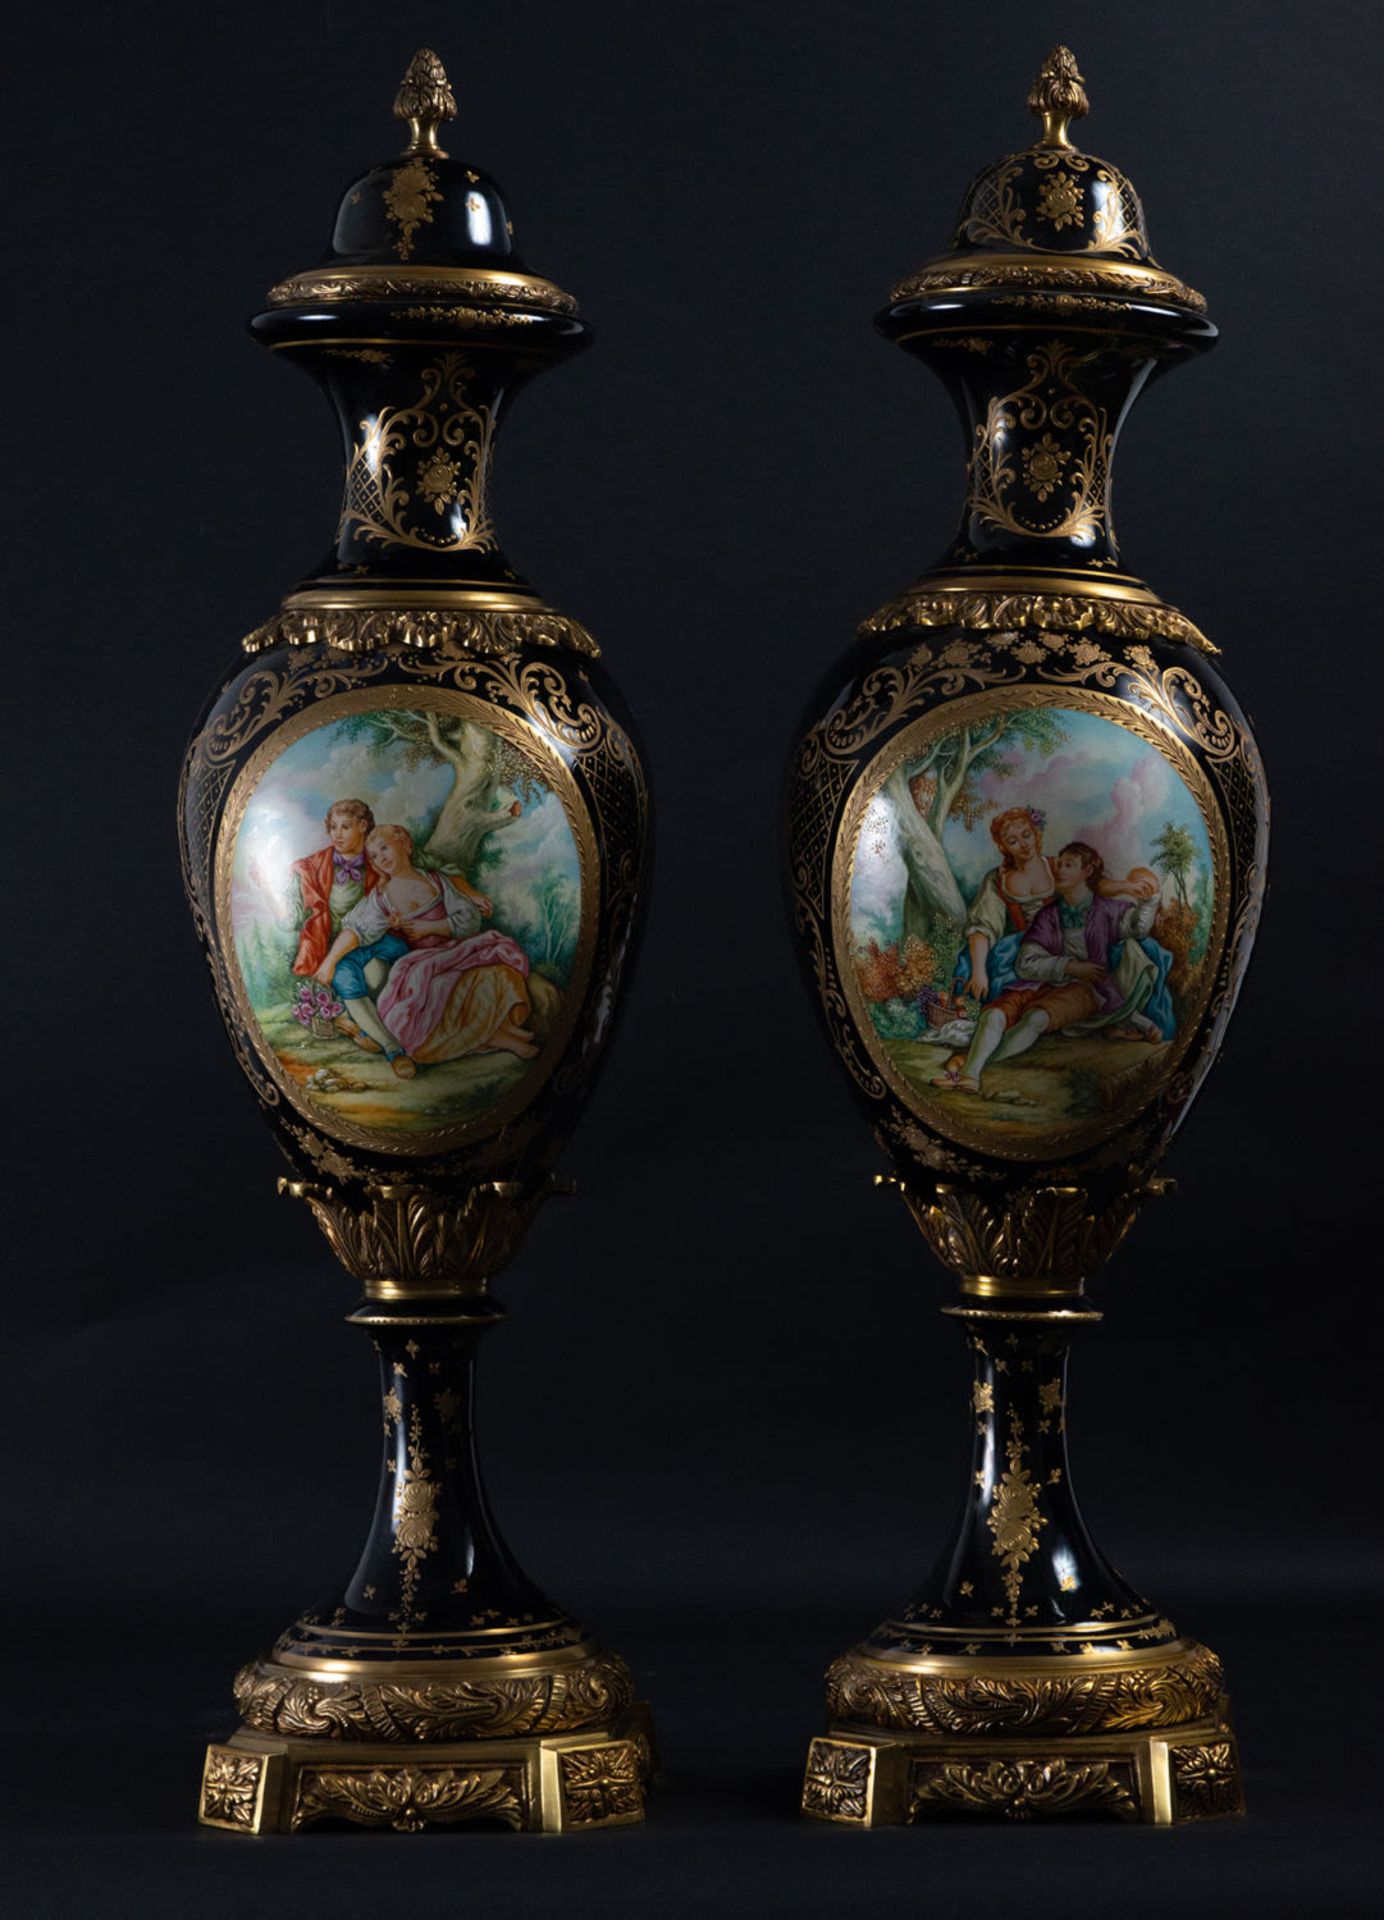 Pair of Large Vases in Polychrome Old Paris Tender Porcelain, late 19th century